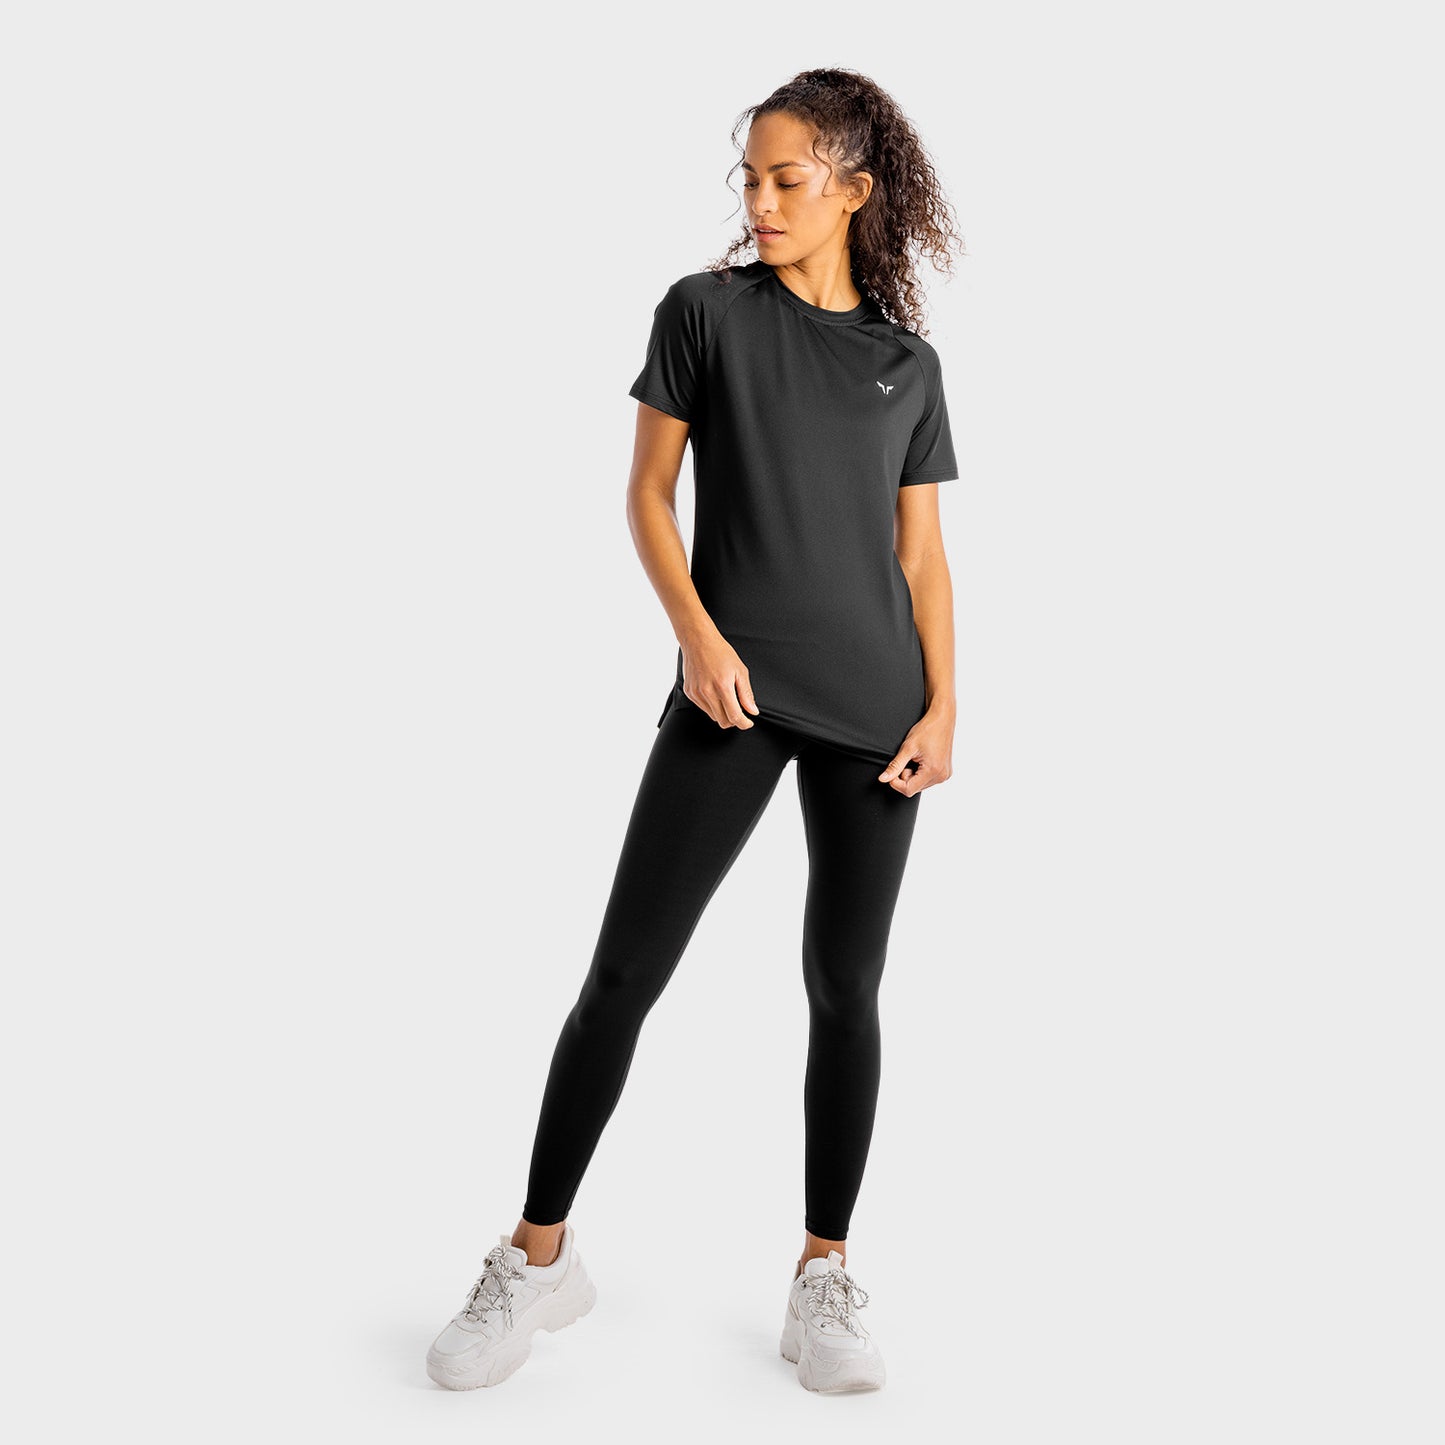 squatwolf-gym-t-shirts-for-women-core-mesh-tee-black-workout-clothes